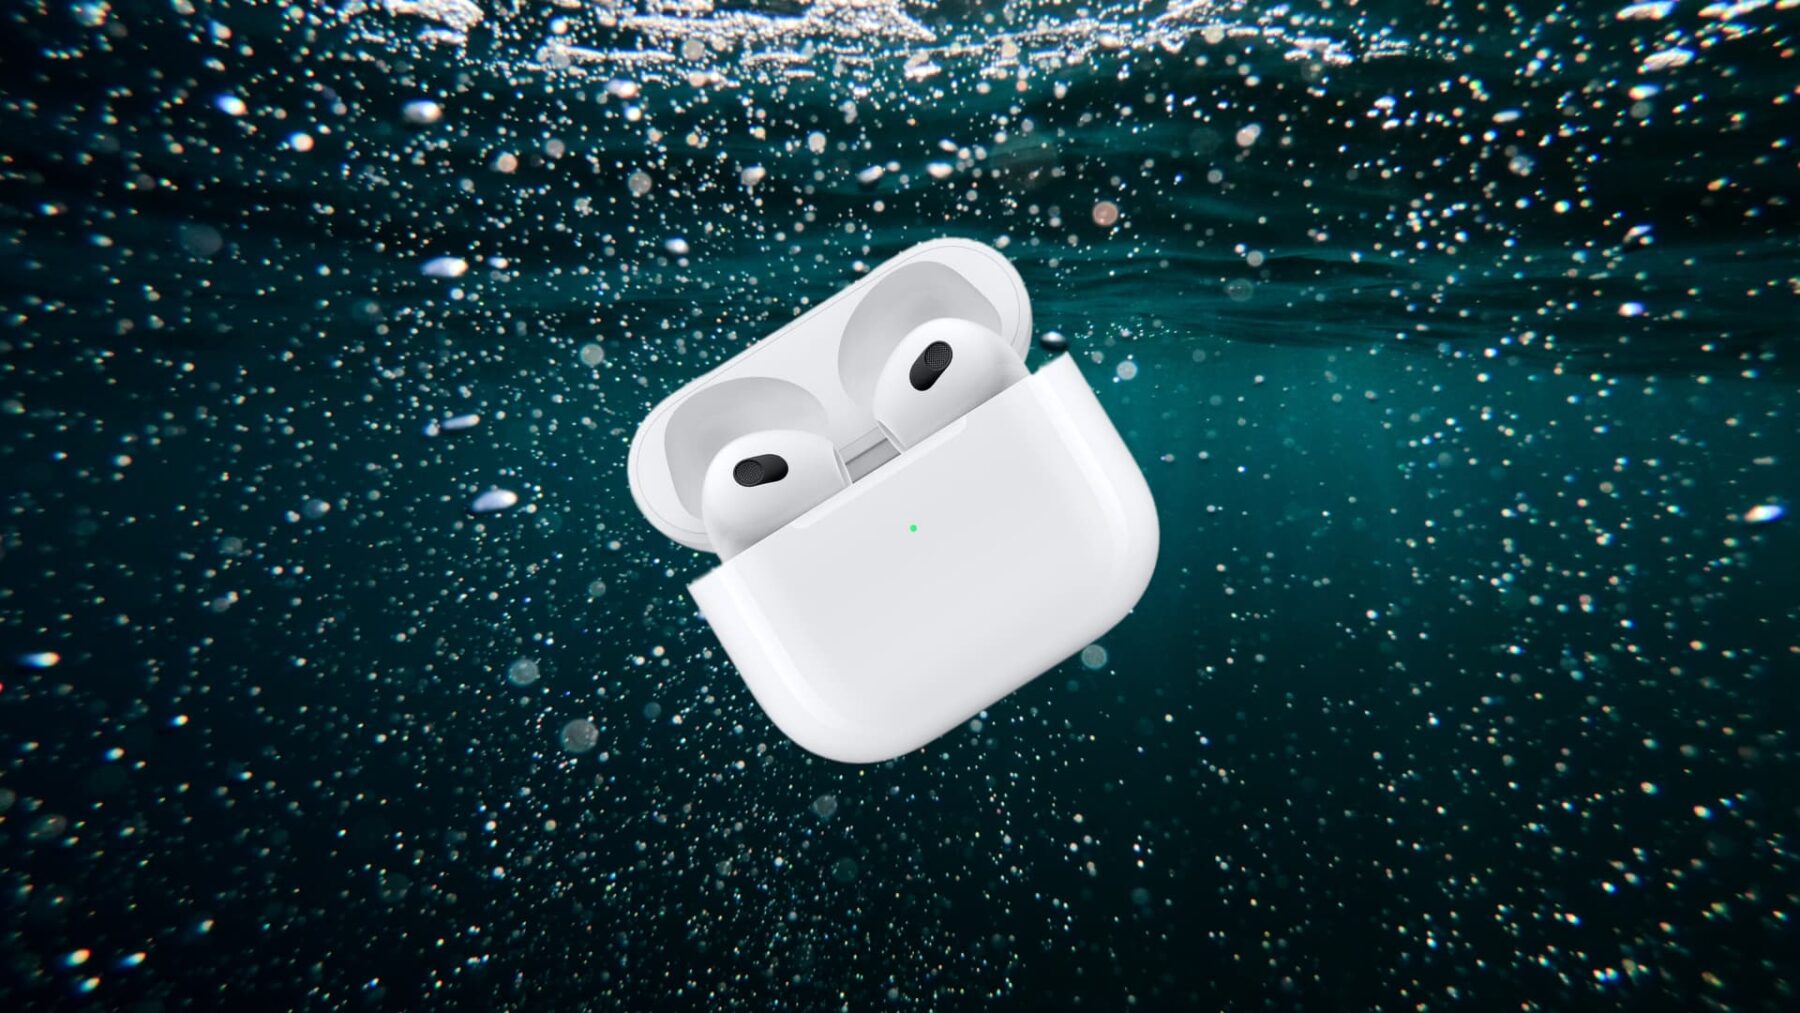 What To Do If AirPods Are Dropped in Water?